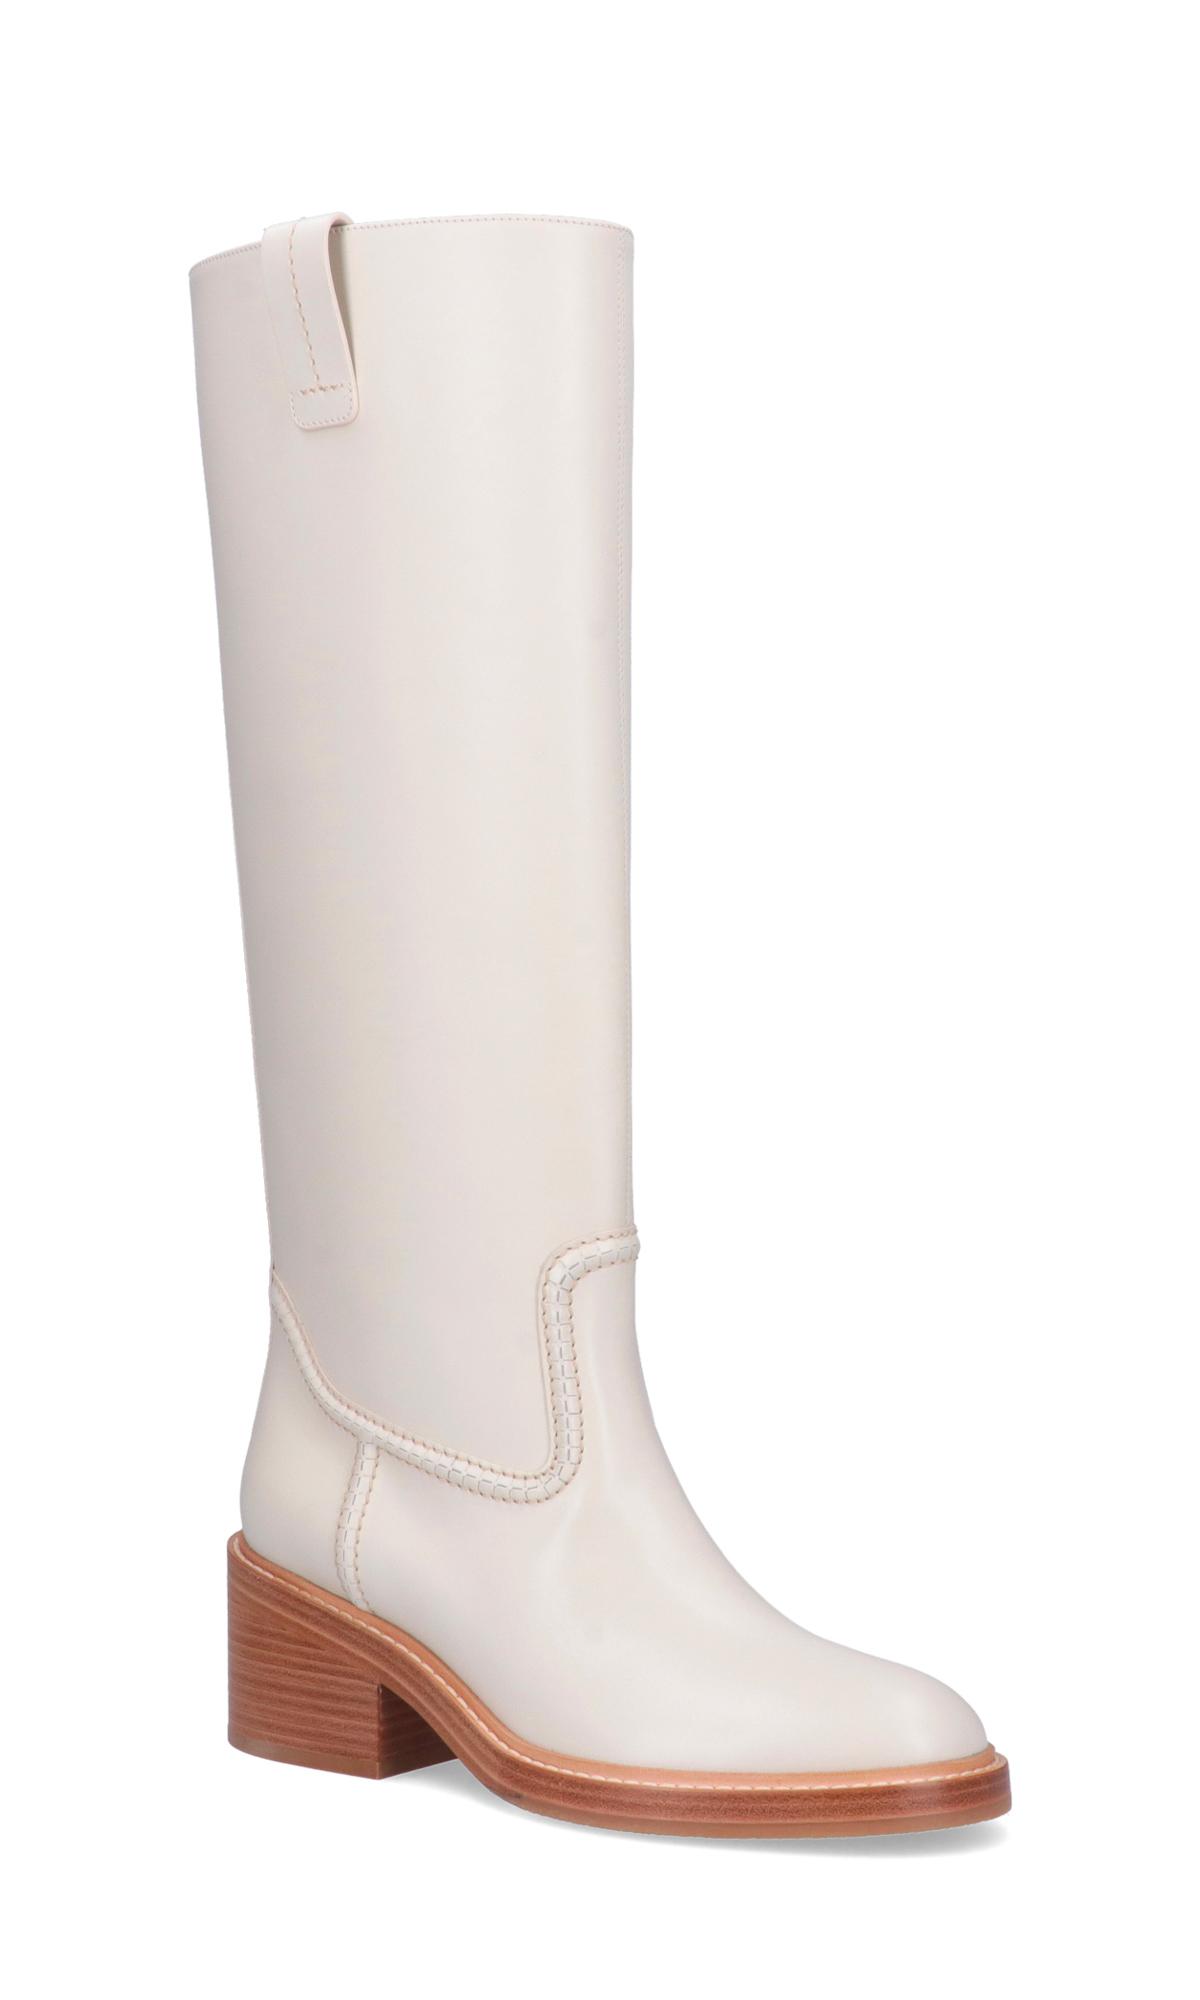 Chloé 'mallo' High Boots in White | Lyst